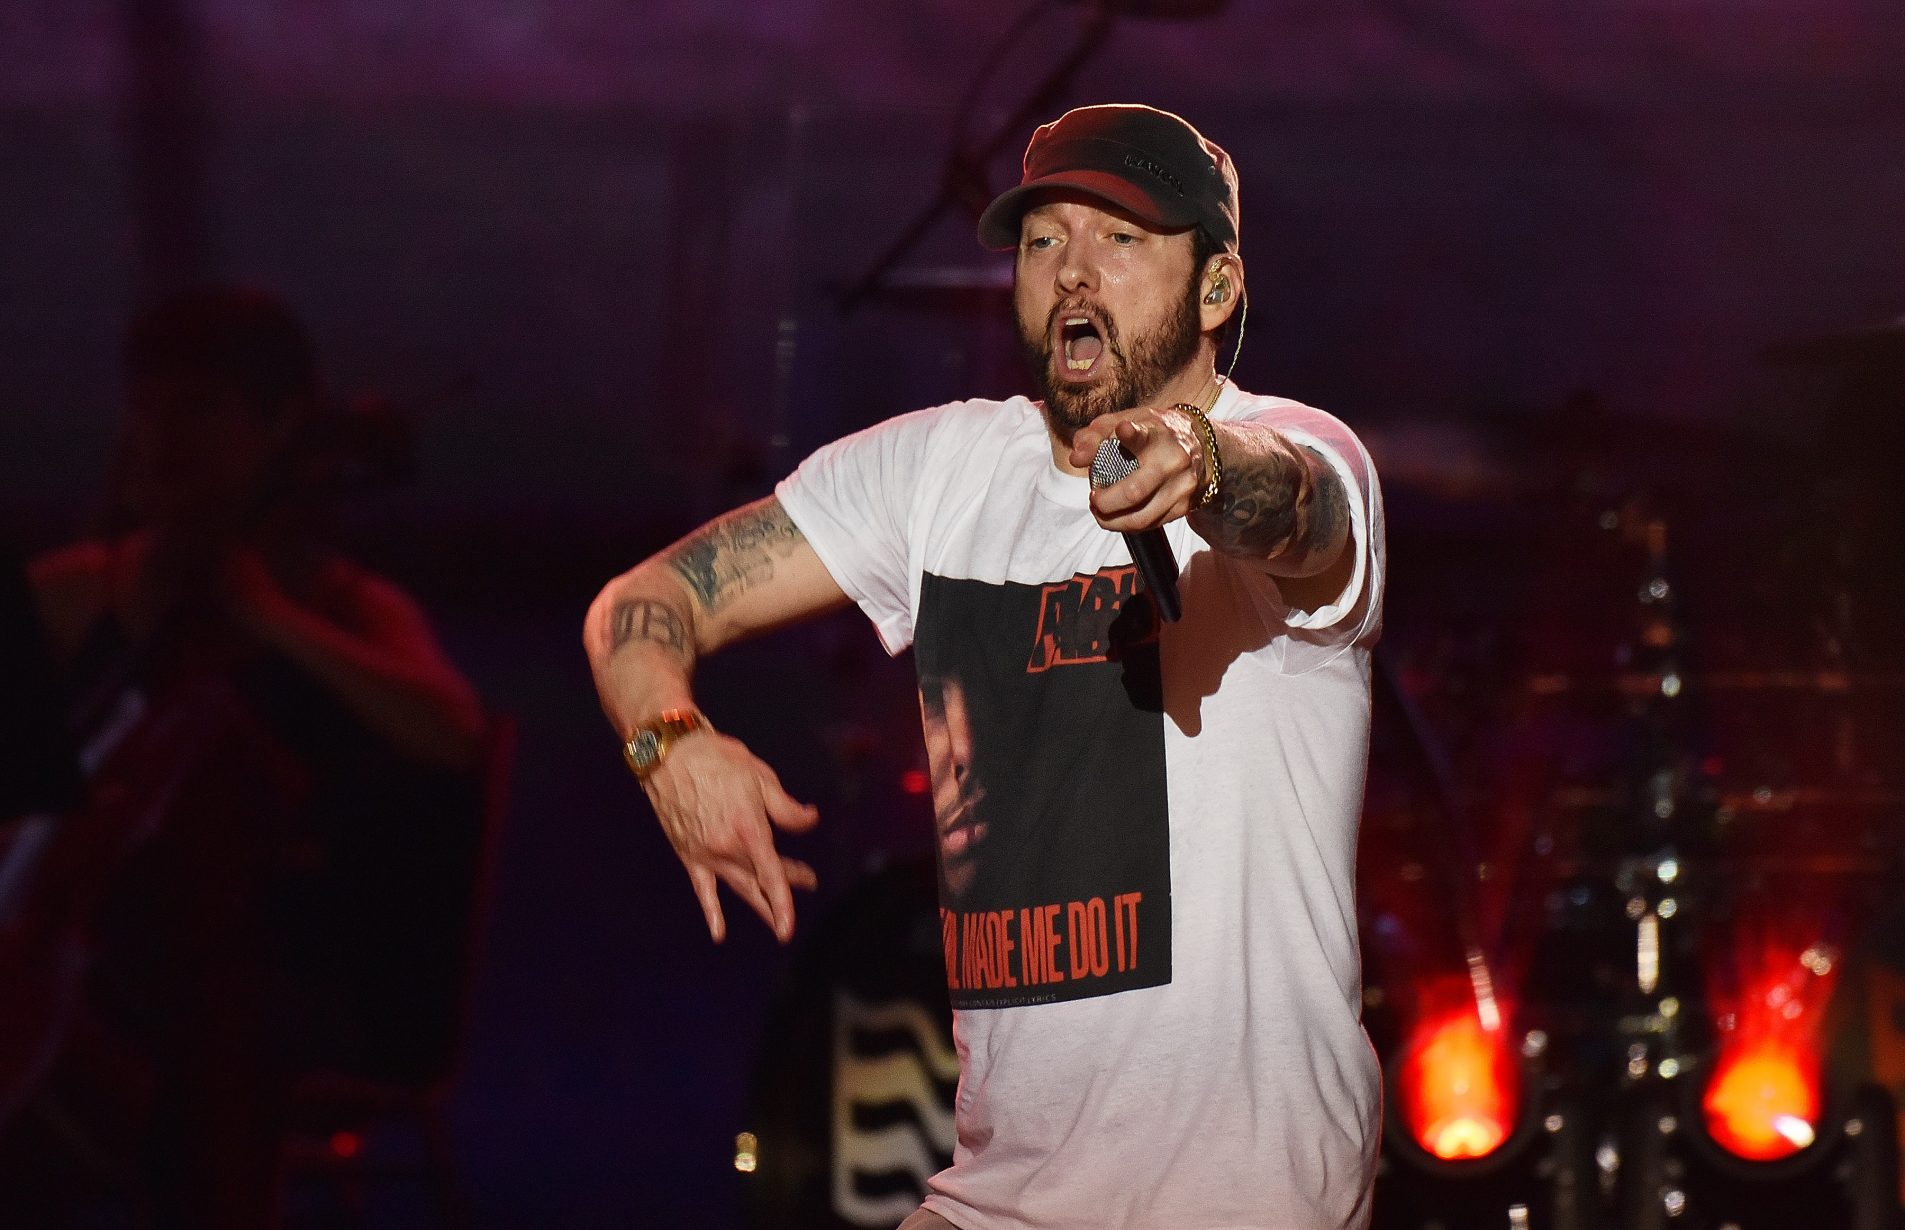 MANCHESTER, TN - JUNE 09:  EMINEM performs during the 2018 Bonnaroo Music & Arts Festival on June 9, 2018 in Manchester, Tennessee.  (Photo by C Flanigan/WireImage)